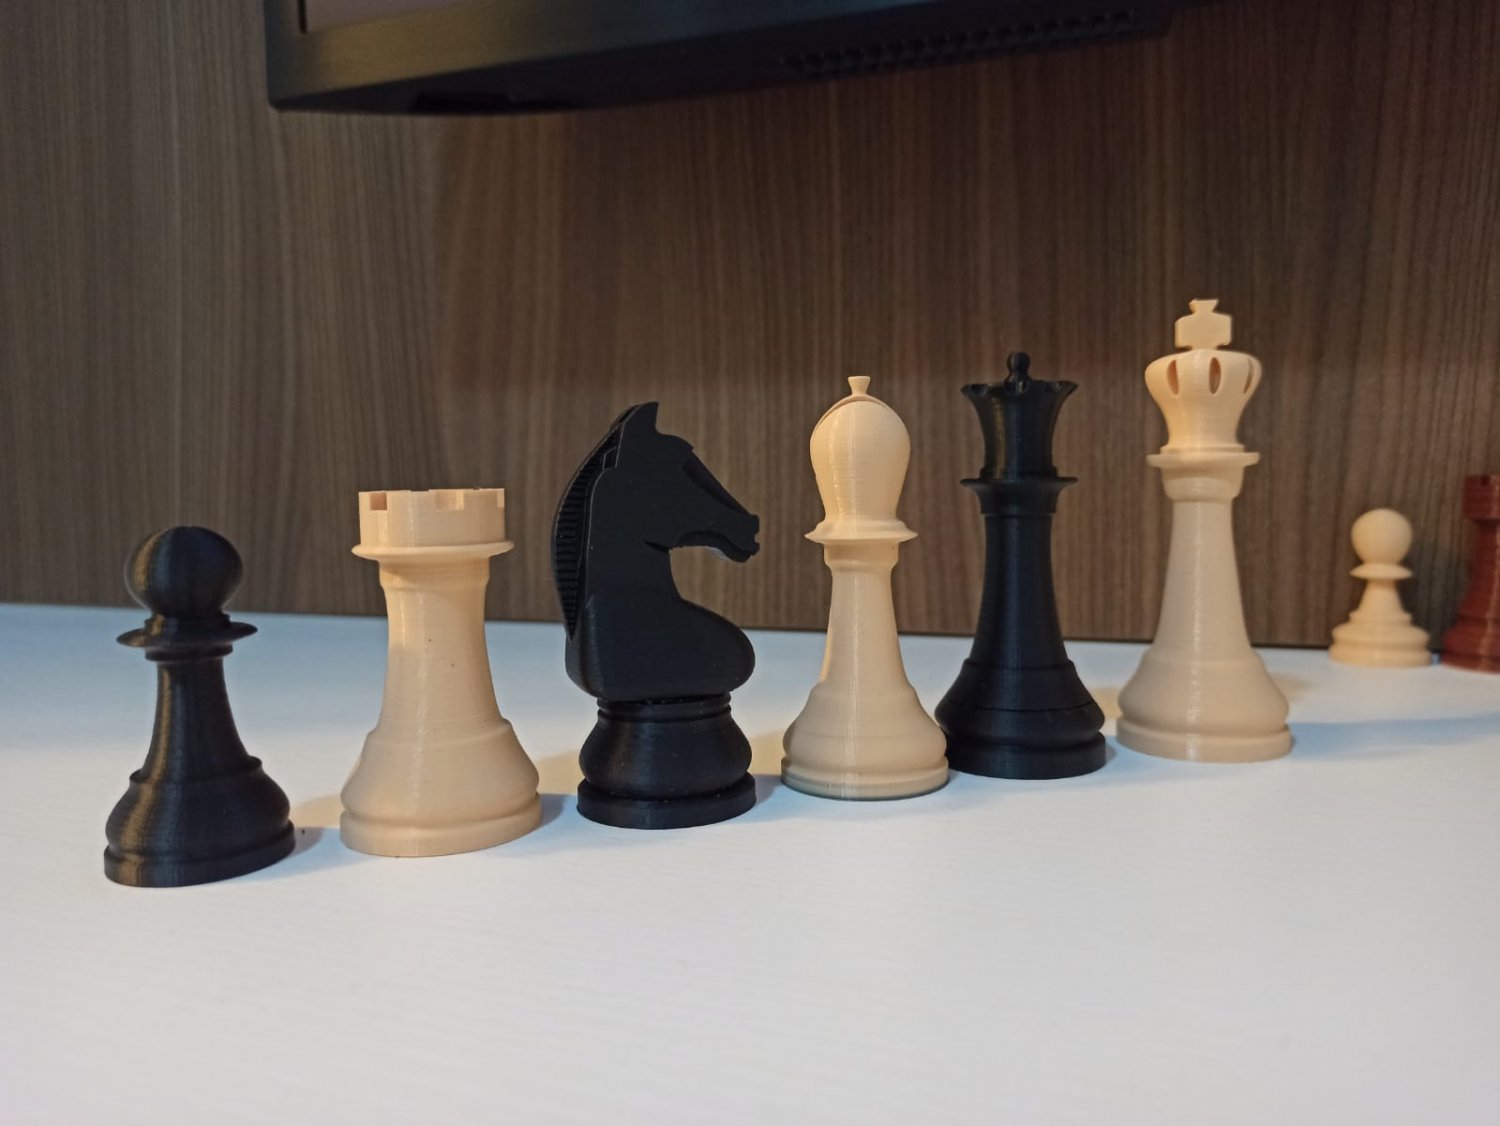 Real 3D live chess board and FIDE - Chess Forums 